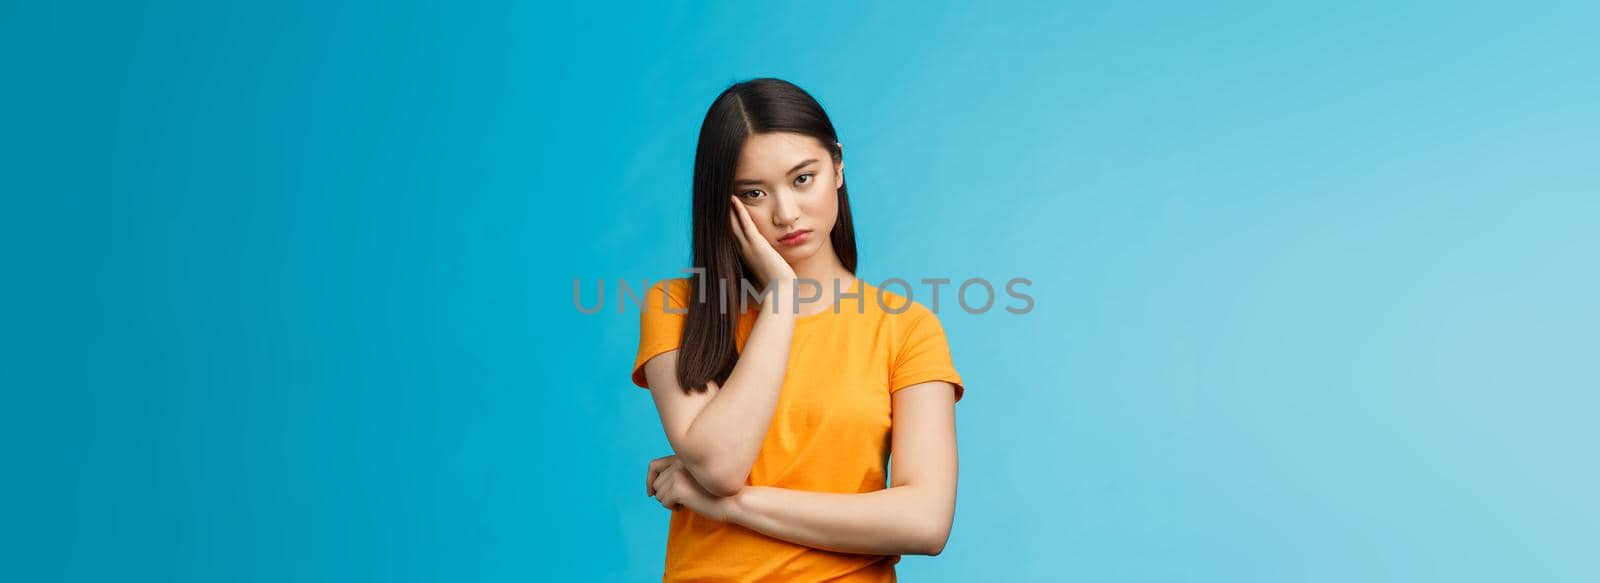 Sad bored asian female student attend boring uninteresting lecture lean face palm, look indifferent express apathy dislike, grimacing and sulking disappointed stand blue background bothered.